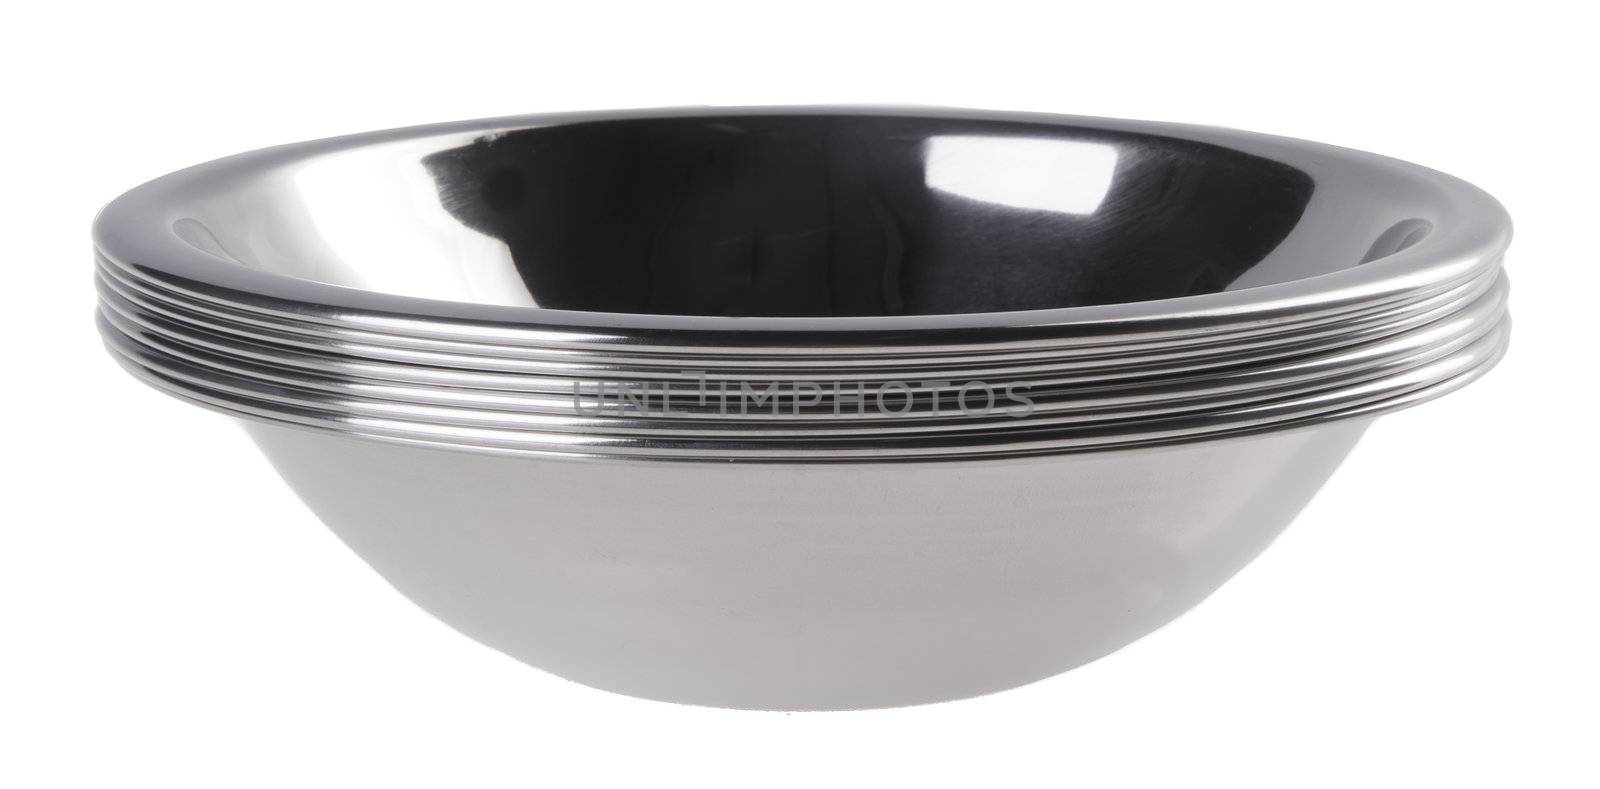 Bowl from stainless steel on white background by heinteh